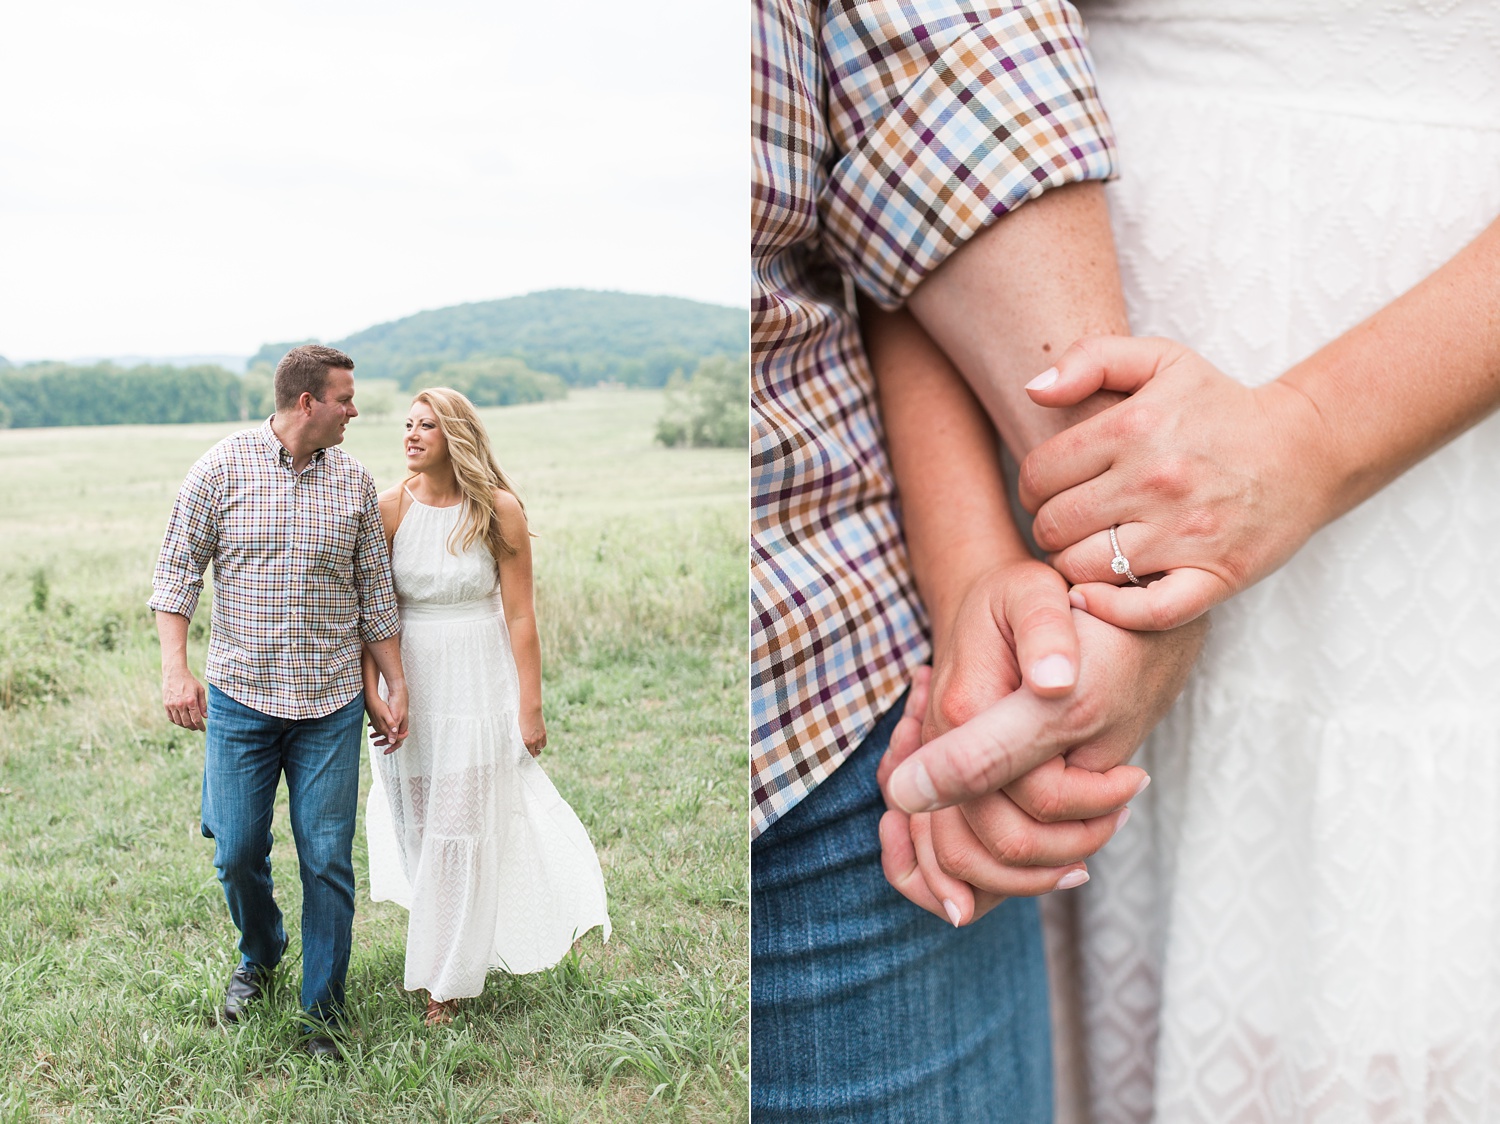 Washington Memorial Chapel Engagement Session | Valley Forge Engagement Photographer | Tiffany and Dan